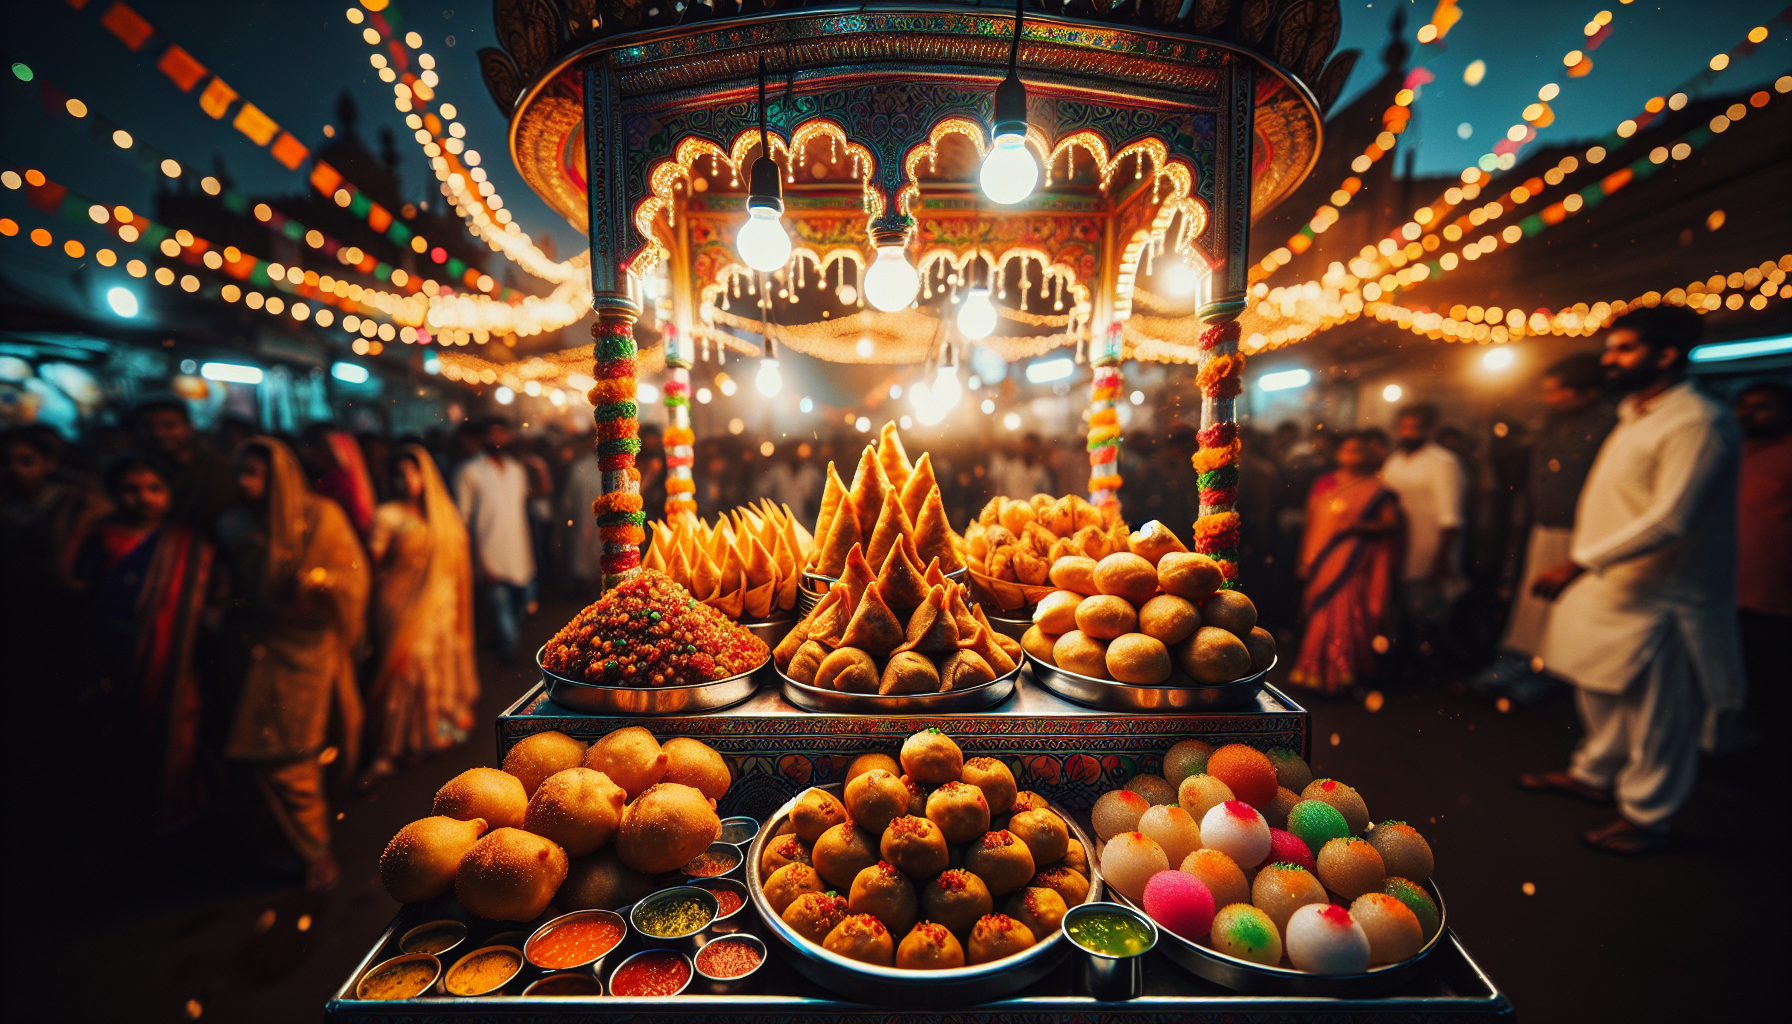 Whats Your Preferred Indian Street Food Snack Thats A Guilty Pleasure?